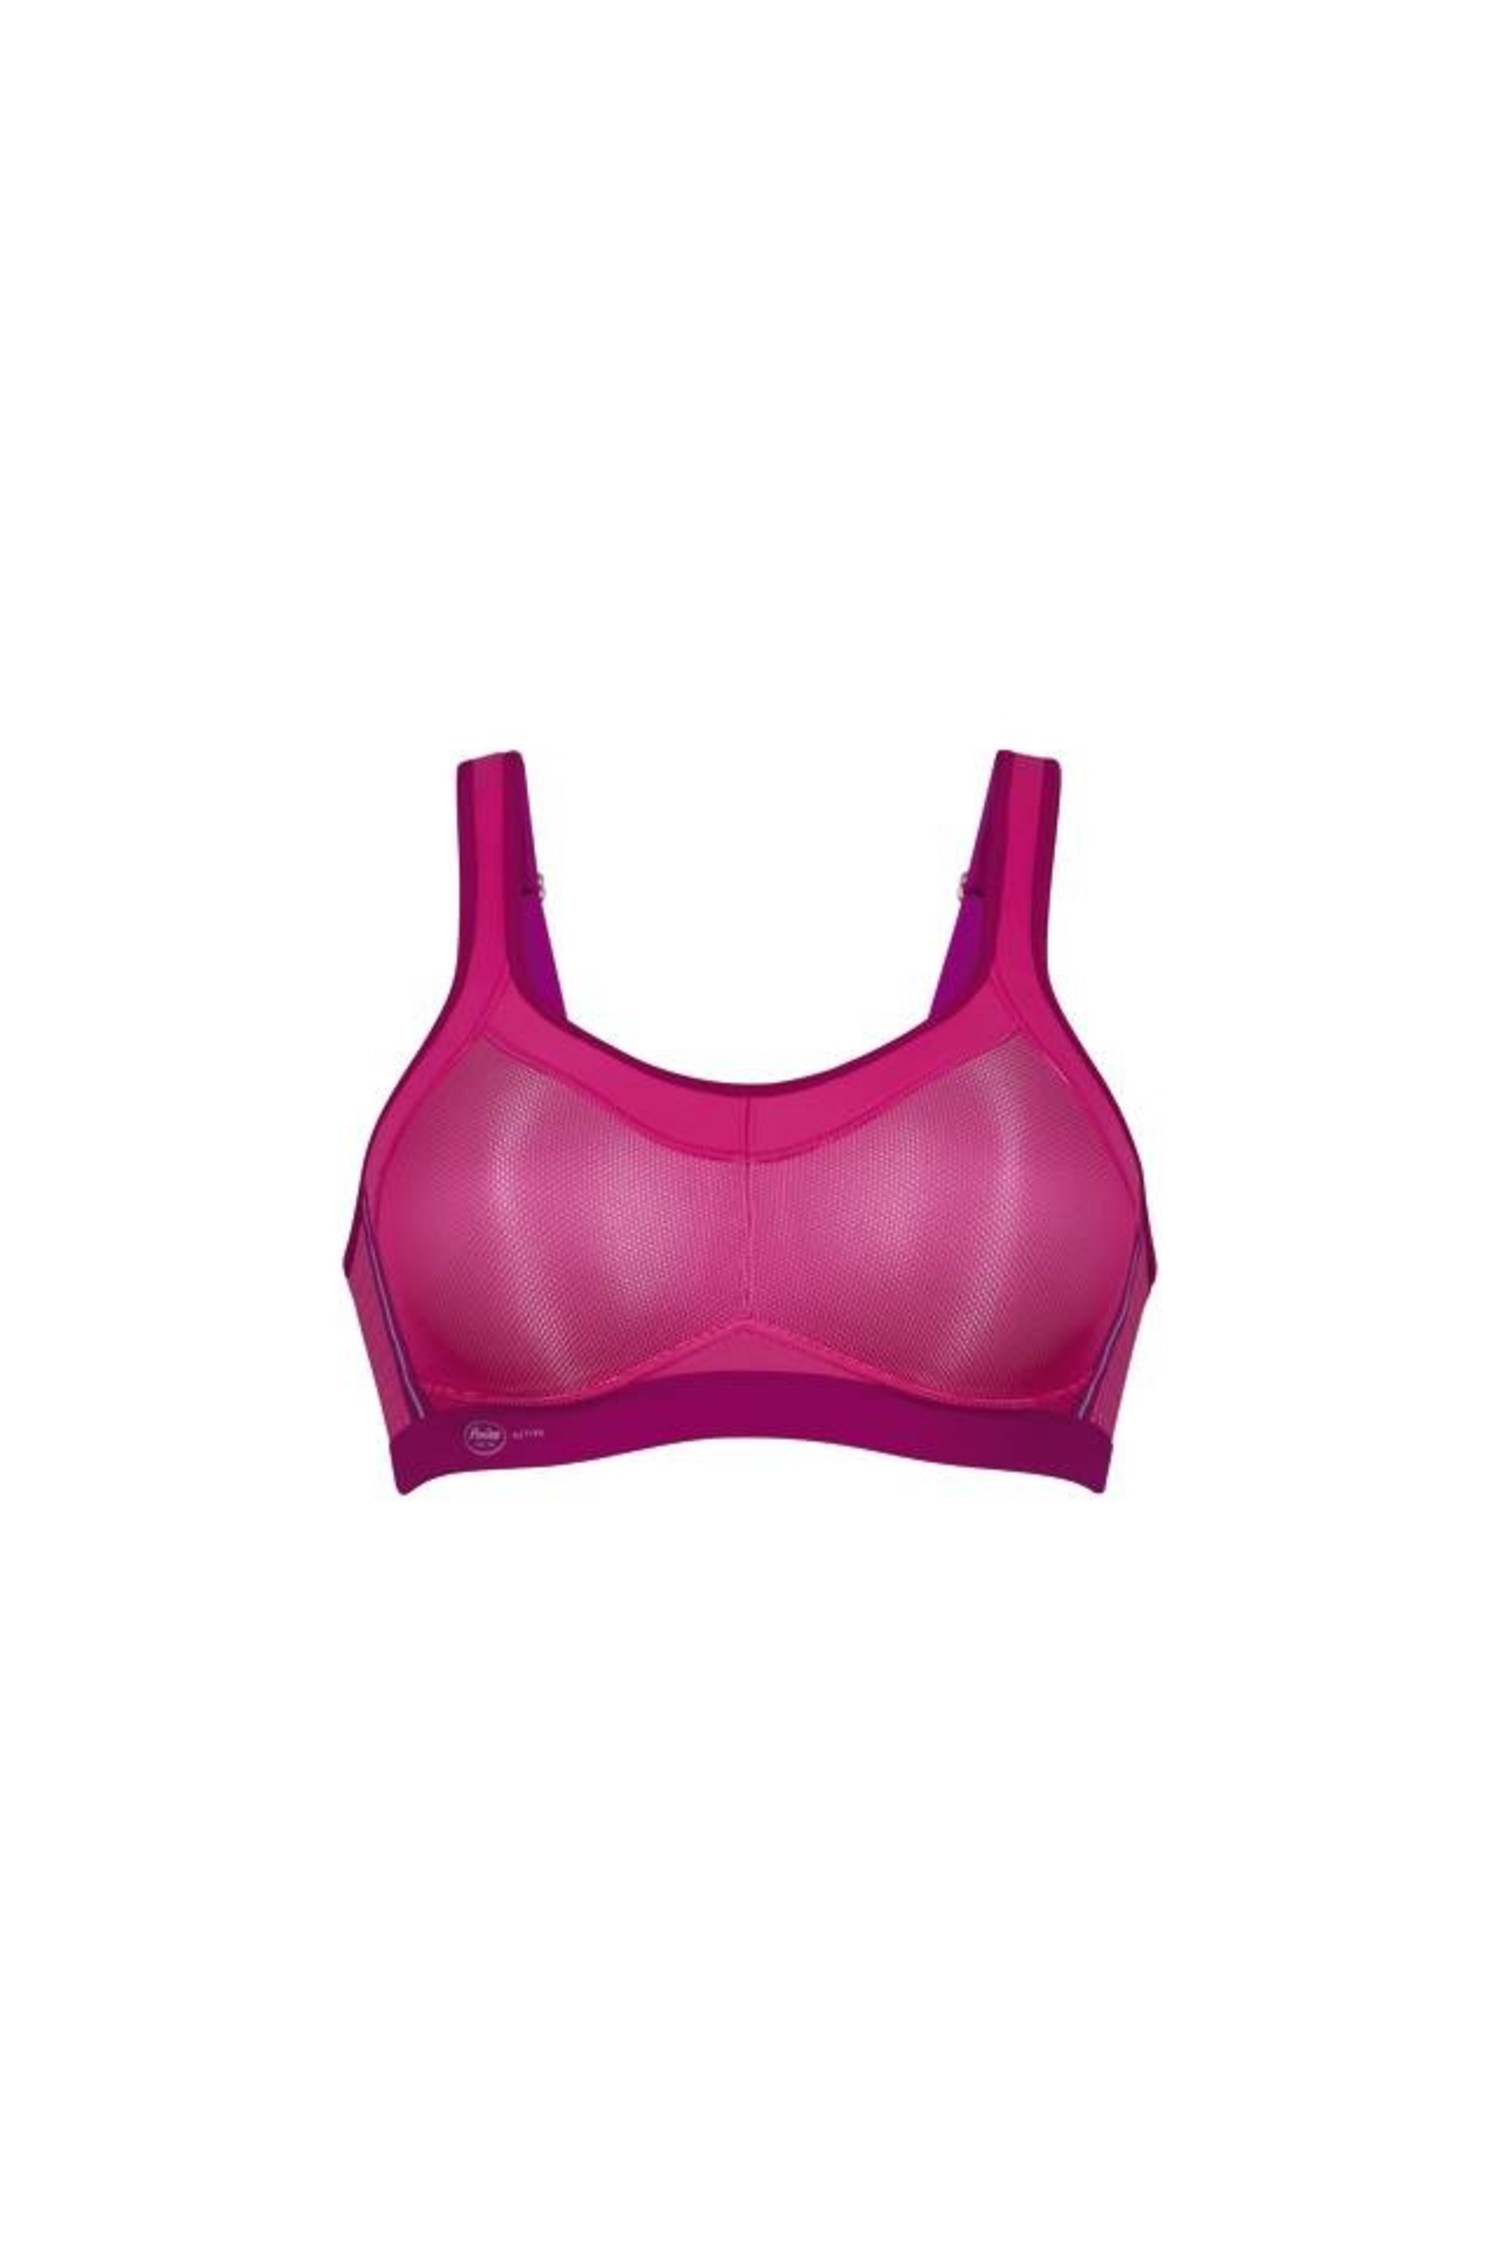 Momentum Sports Bra Electric Pink 5529 - Lace & Day